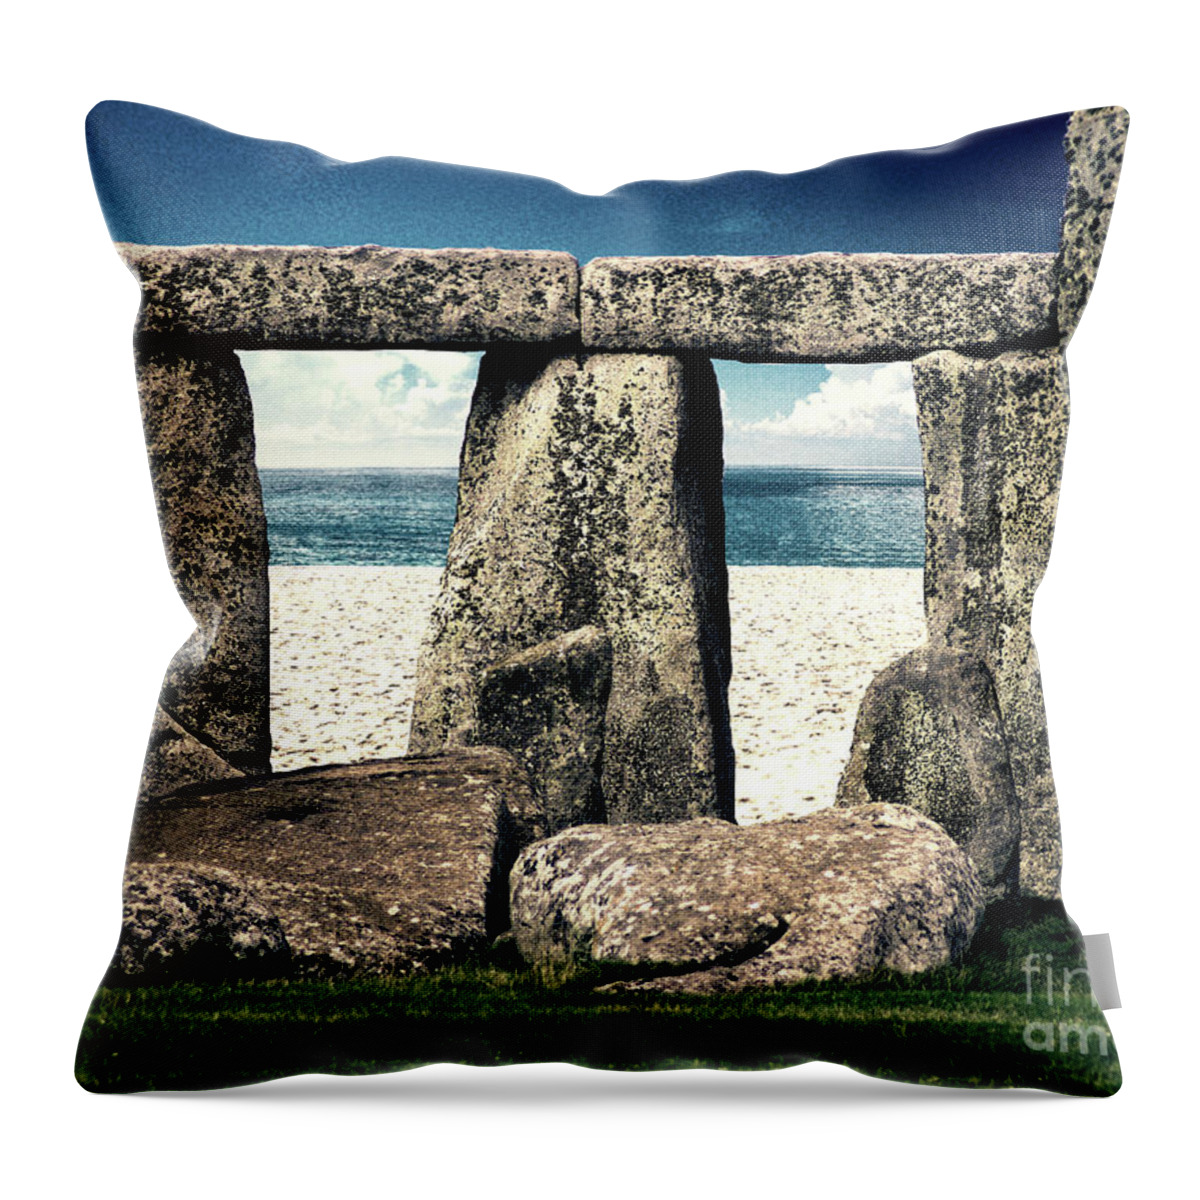 Stonehenge Throw Pillow featuring the digital art Stonehenge On The Beach by Phil Perkins